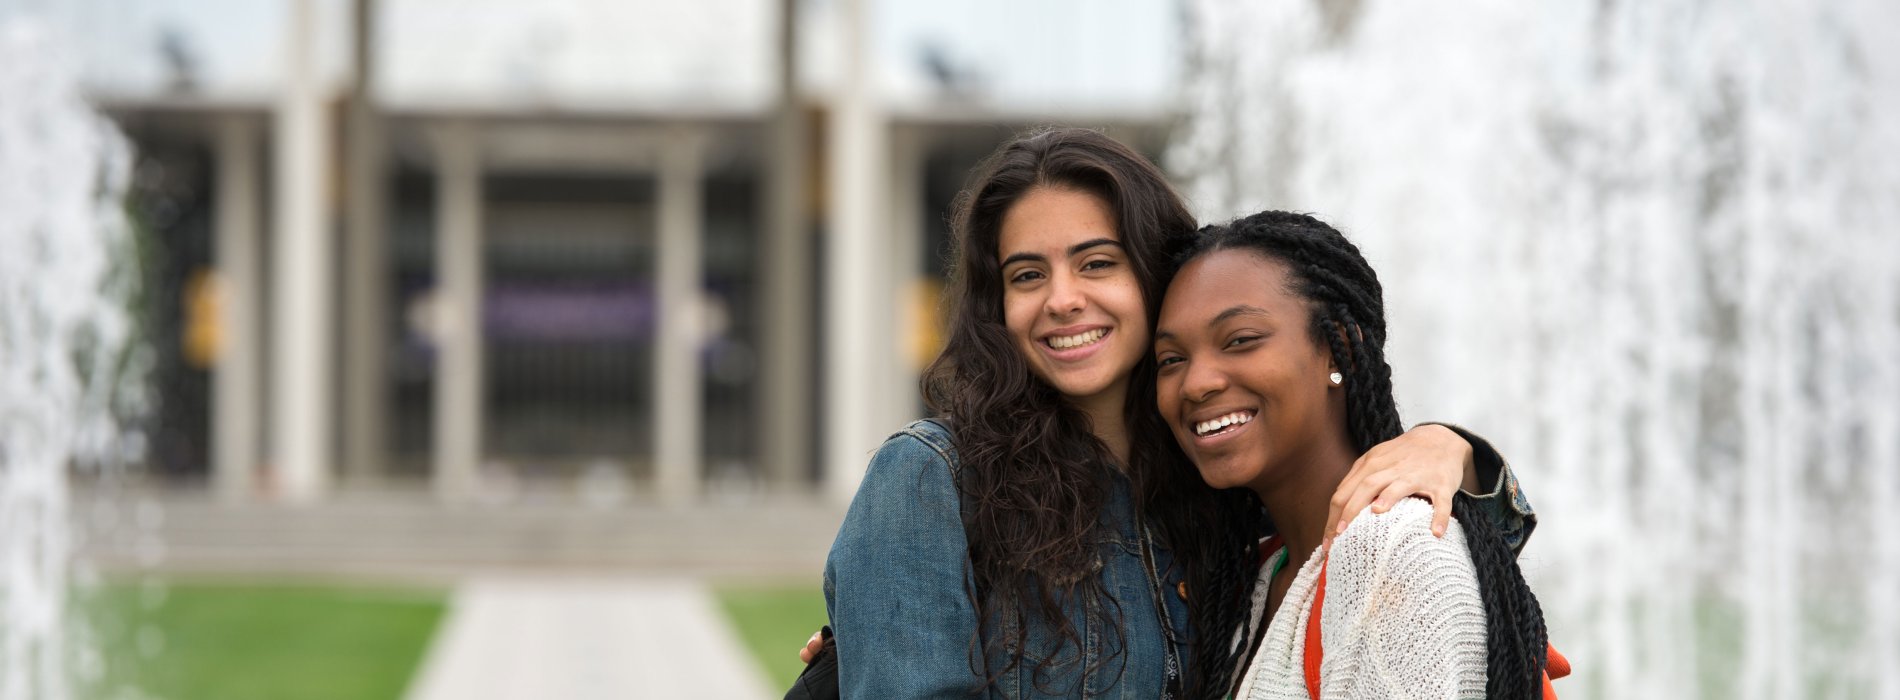 Two students with backpacks embrace as they smile and pose for a photo in front of fountains on the Uptown Campus.